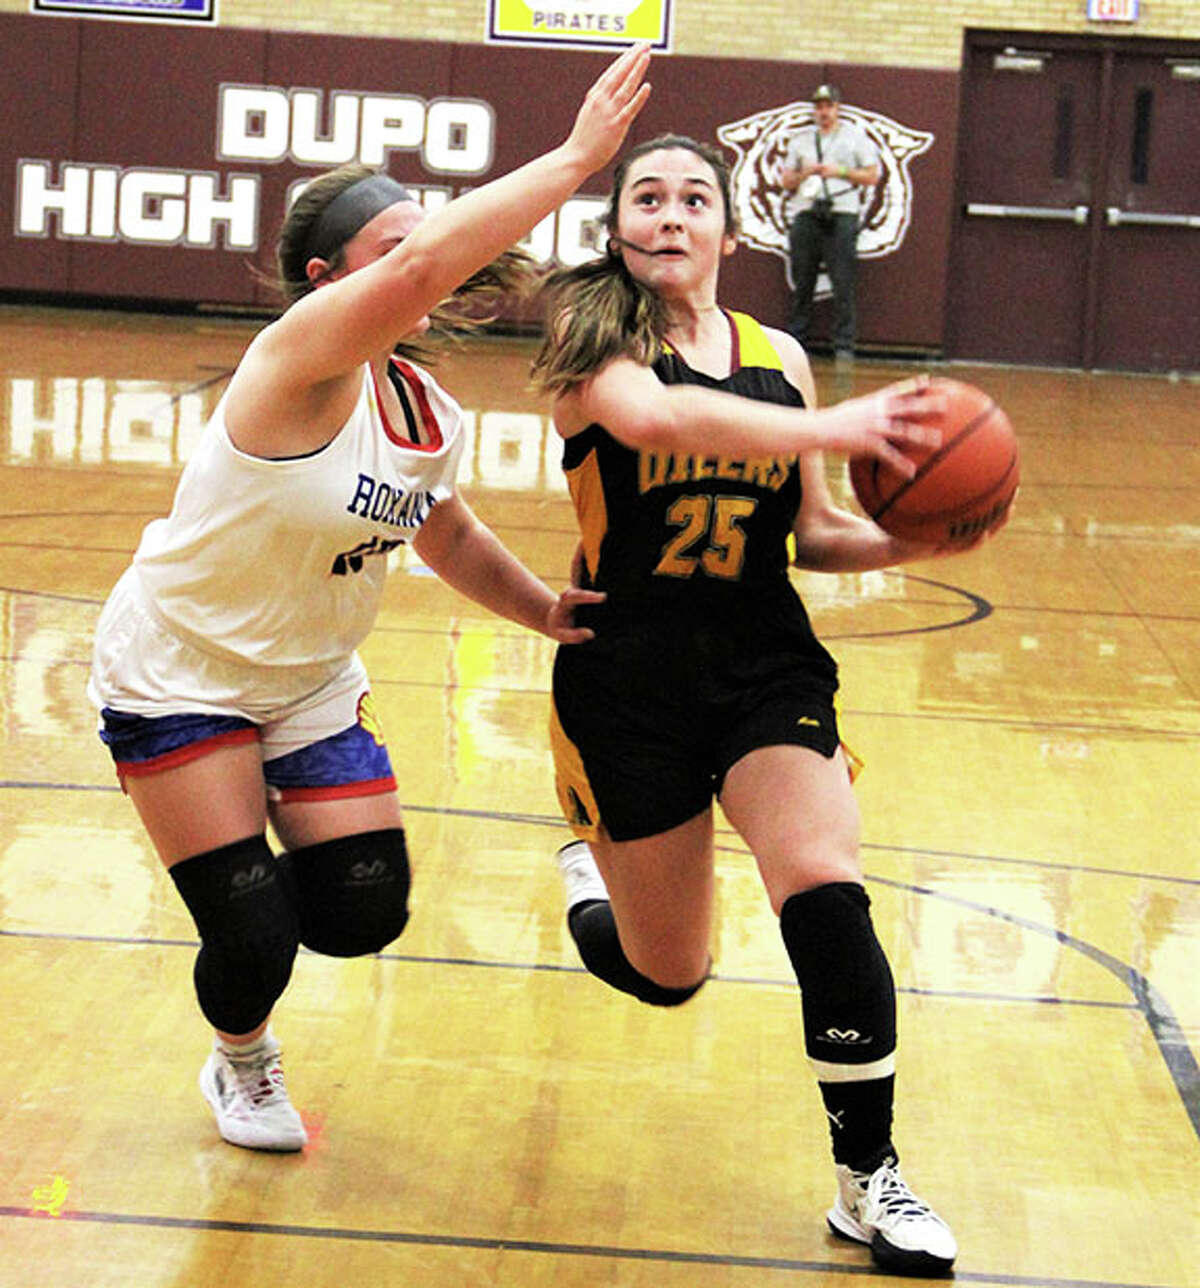 EA-WR's Milla LeGette (right) takes the ball to the basket against Roxana's Kinsley Mouser on Thursday night in a semifinal at the Cat Classic in Dupo.